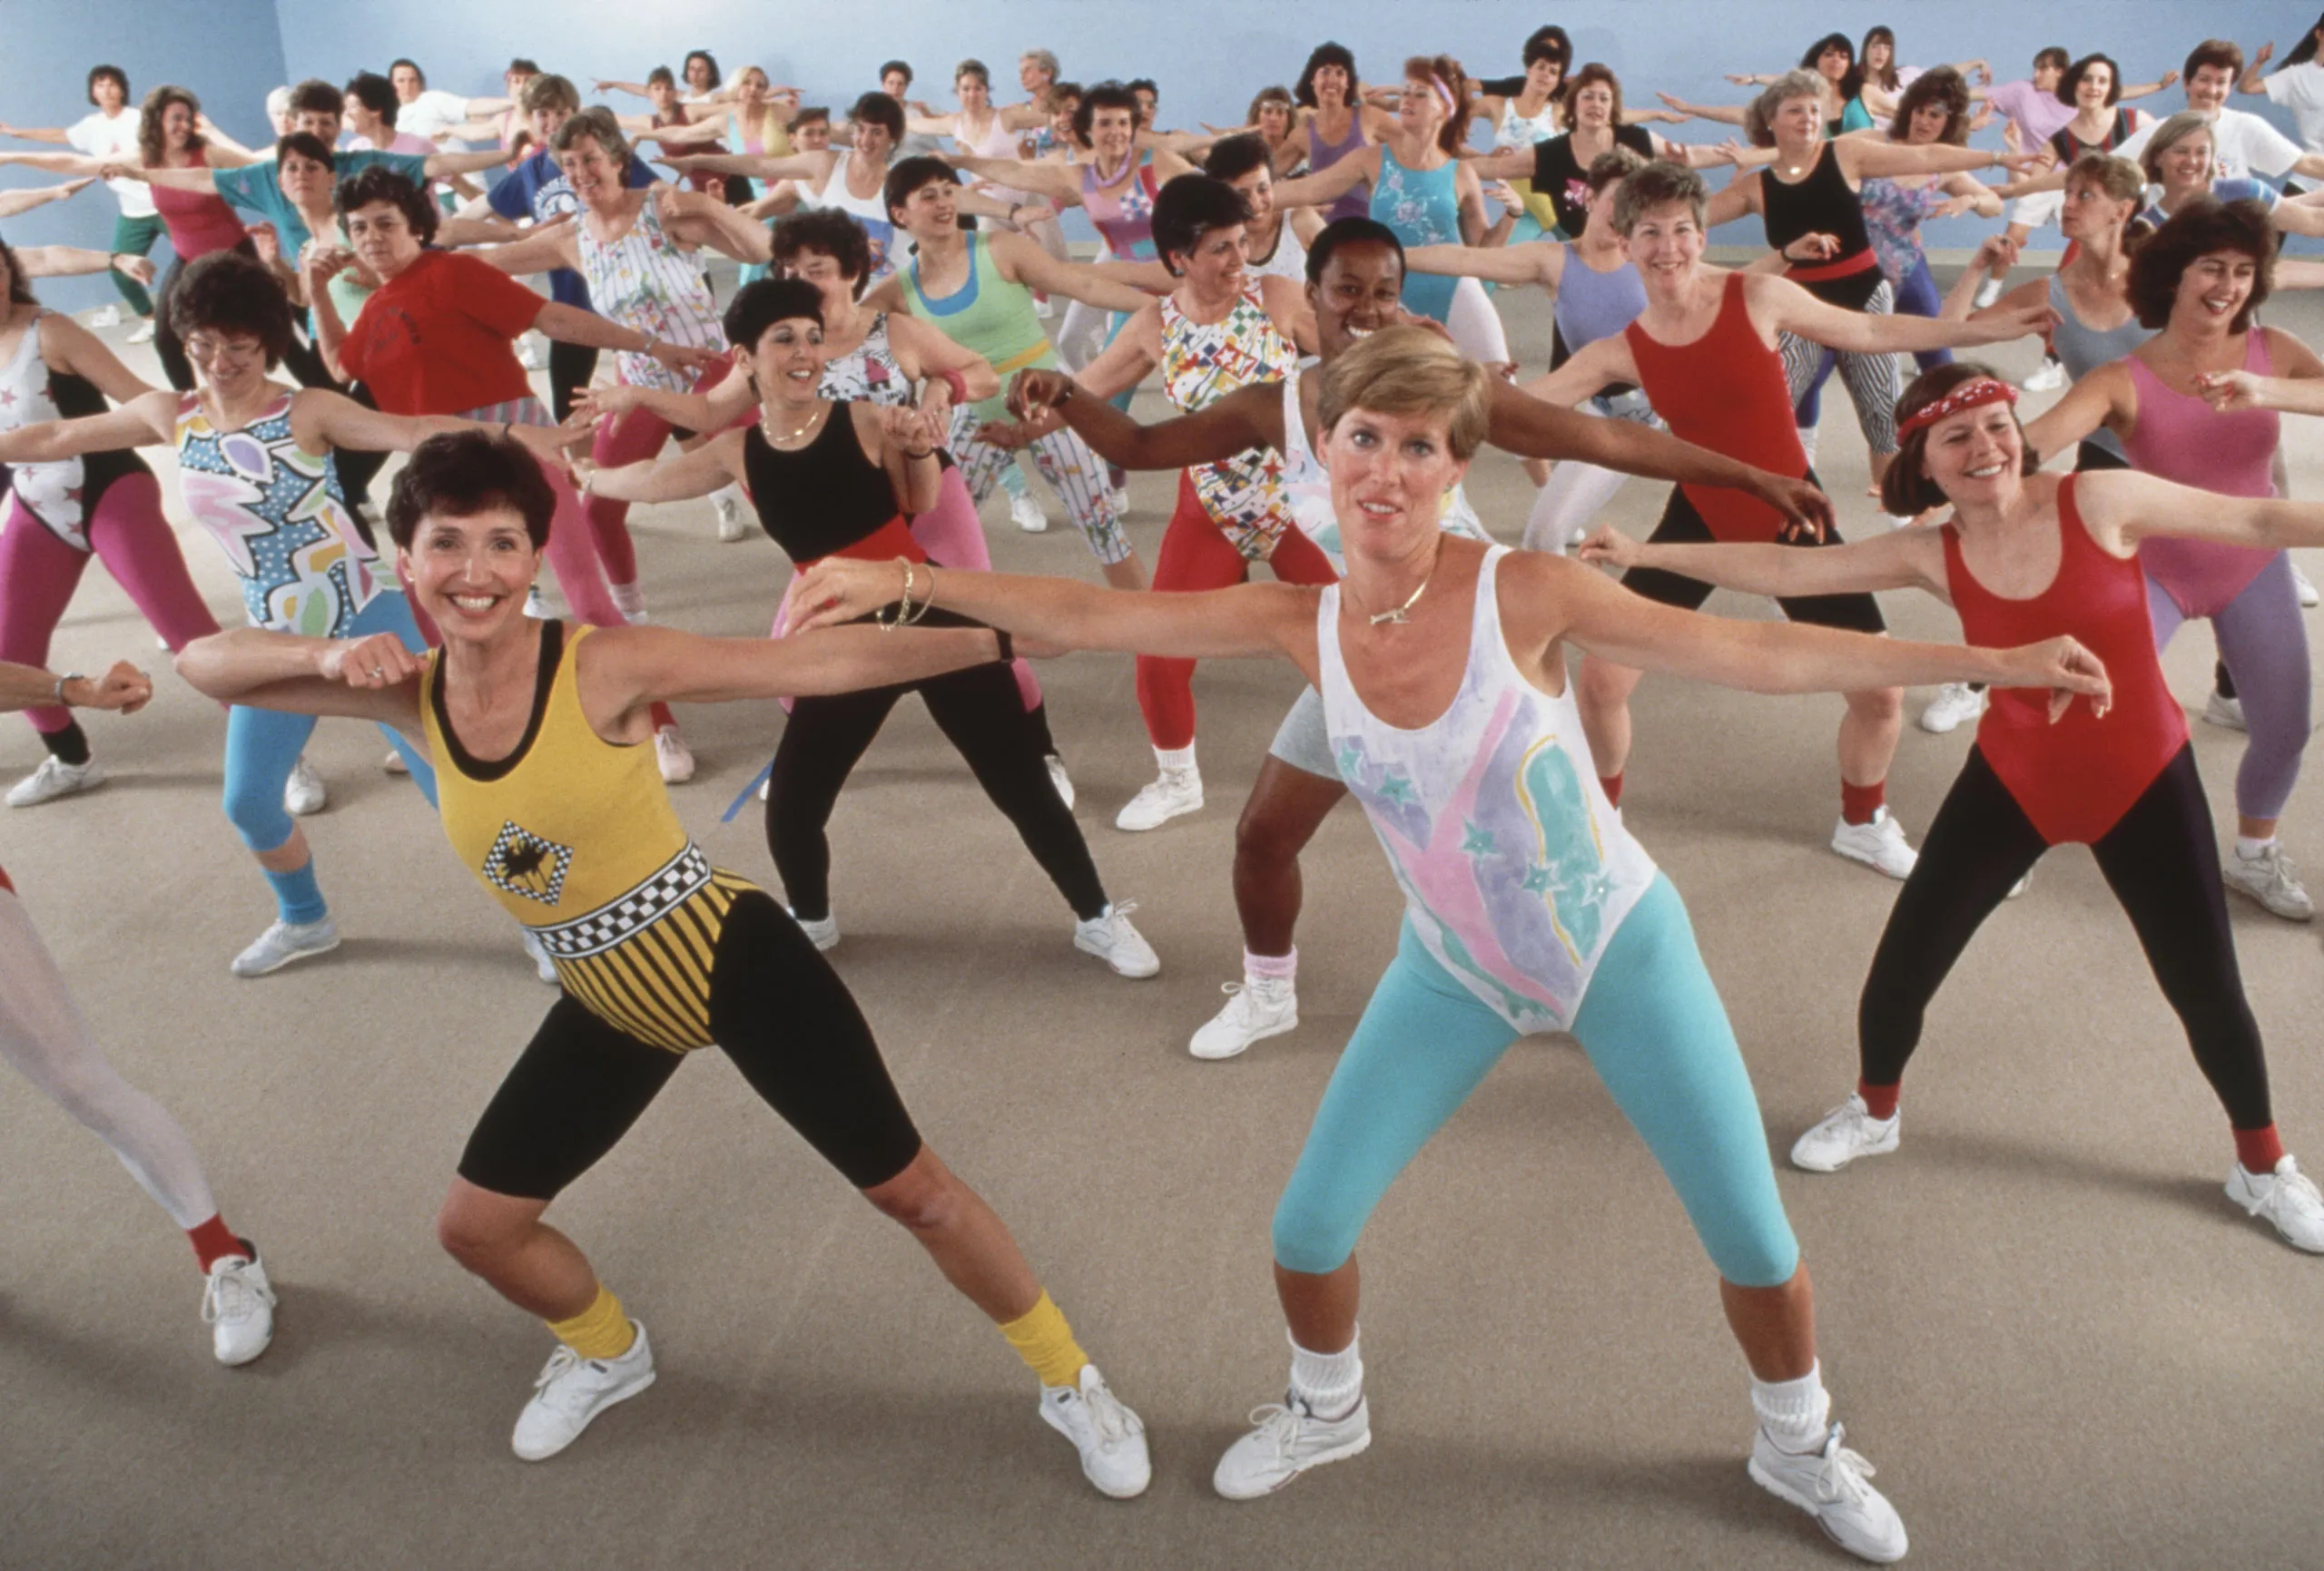 Jazzercise: The Revolutionary Fitness Program that Shaped the Industry